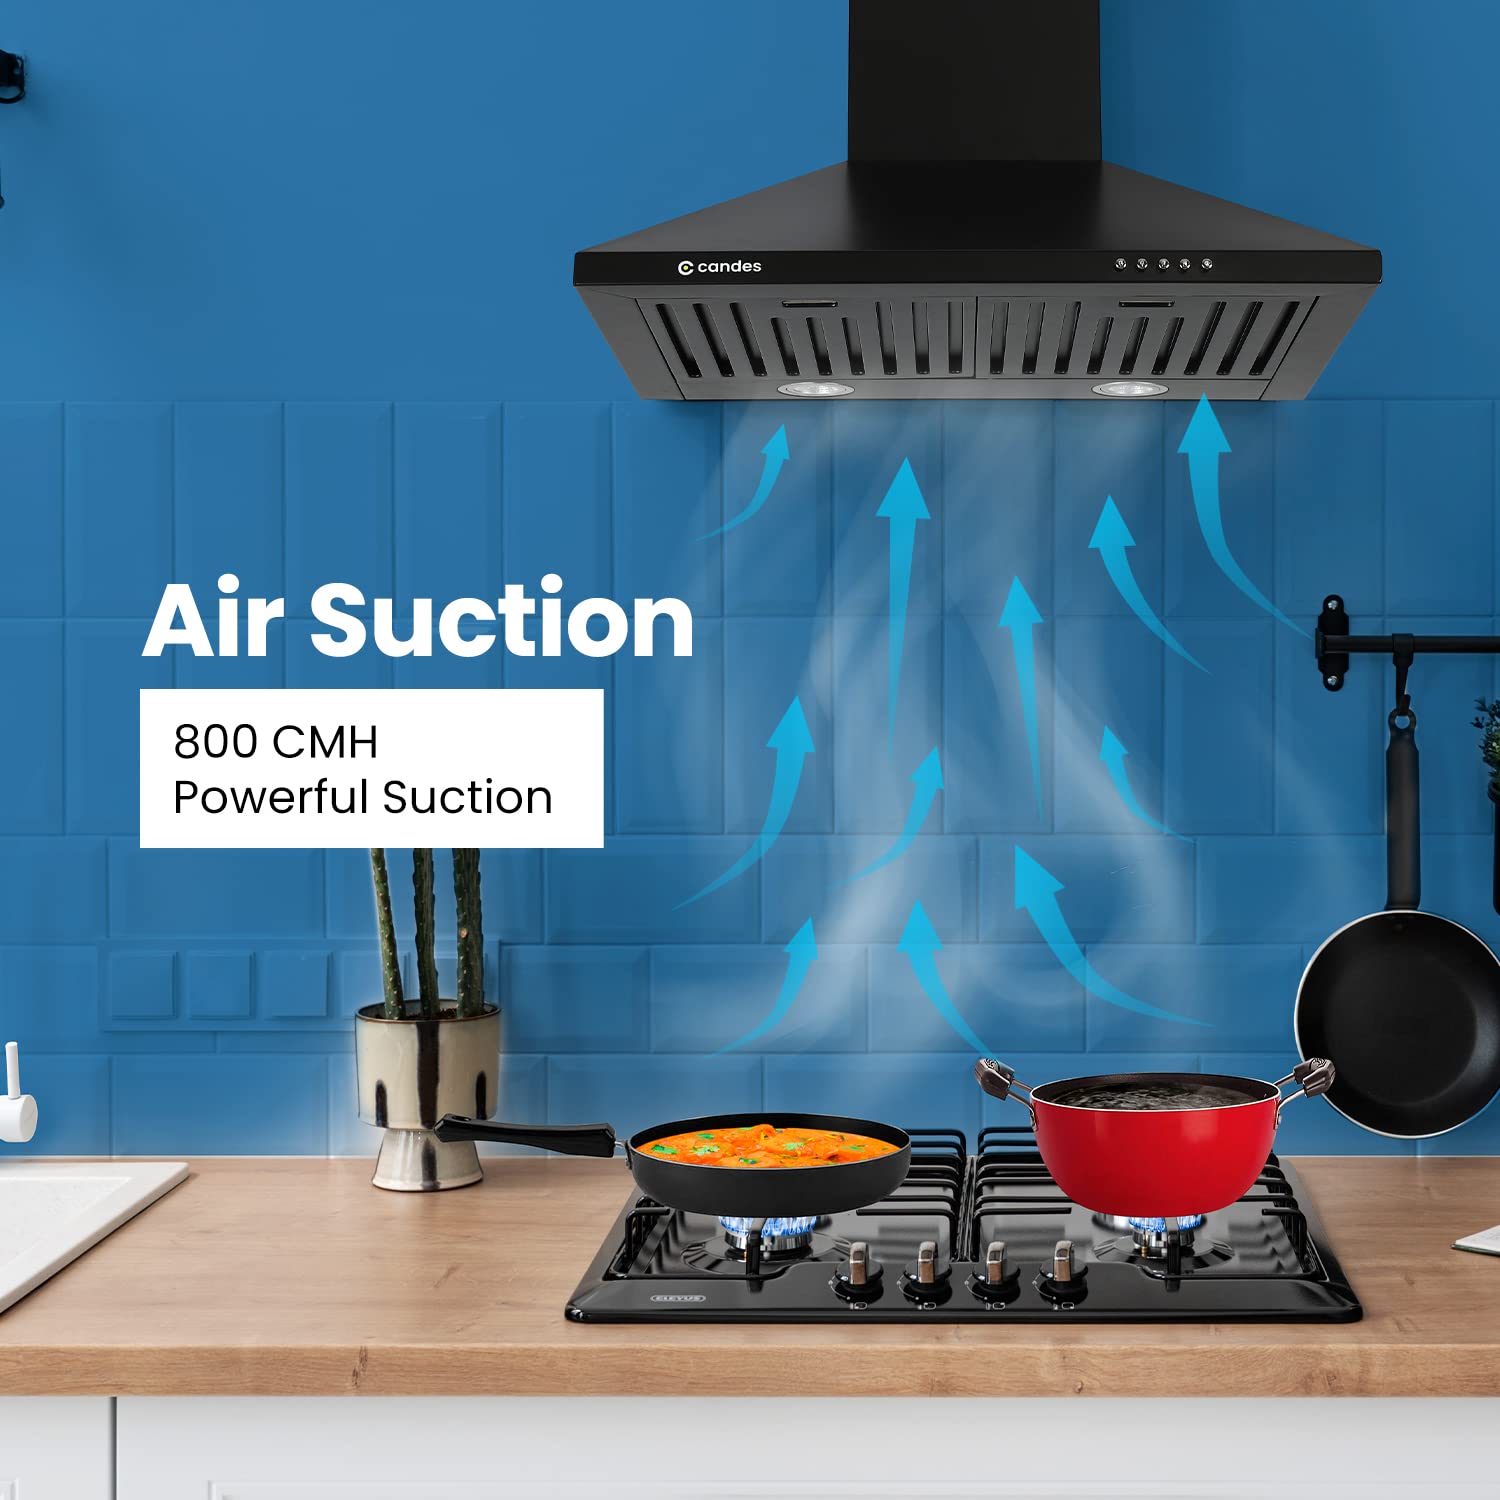 Candes Spire Kitchen Chimney 60 Cms with Powerful 800 m3/h Suction| Stainless Steel Baffle Filter | Anti-Fingerprint Black Wall Mount Range Hood | 3 Level Push Control |Plastic Blower | 2 Level Led Lighting | Warranty 1 Year on Product & 5 Years On Motor